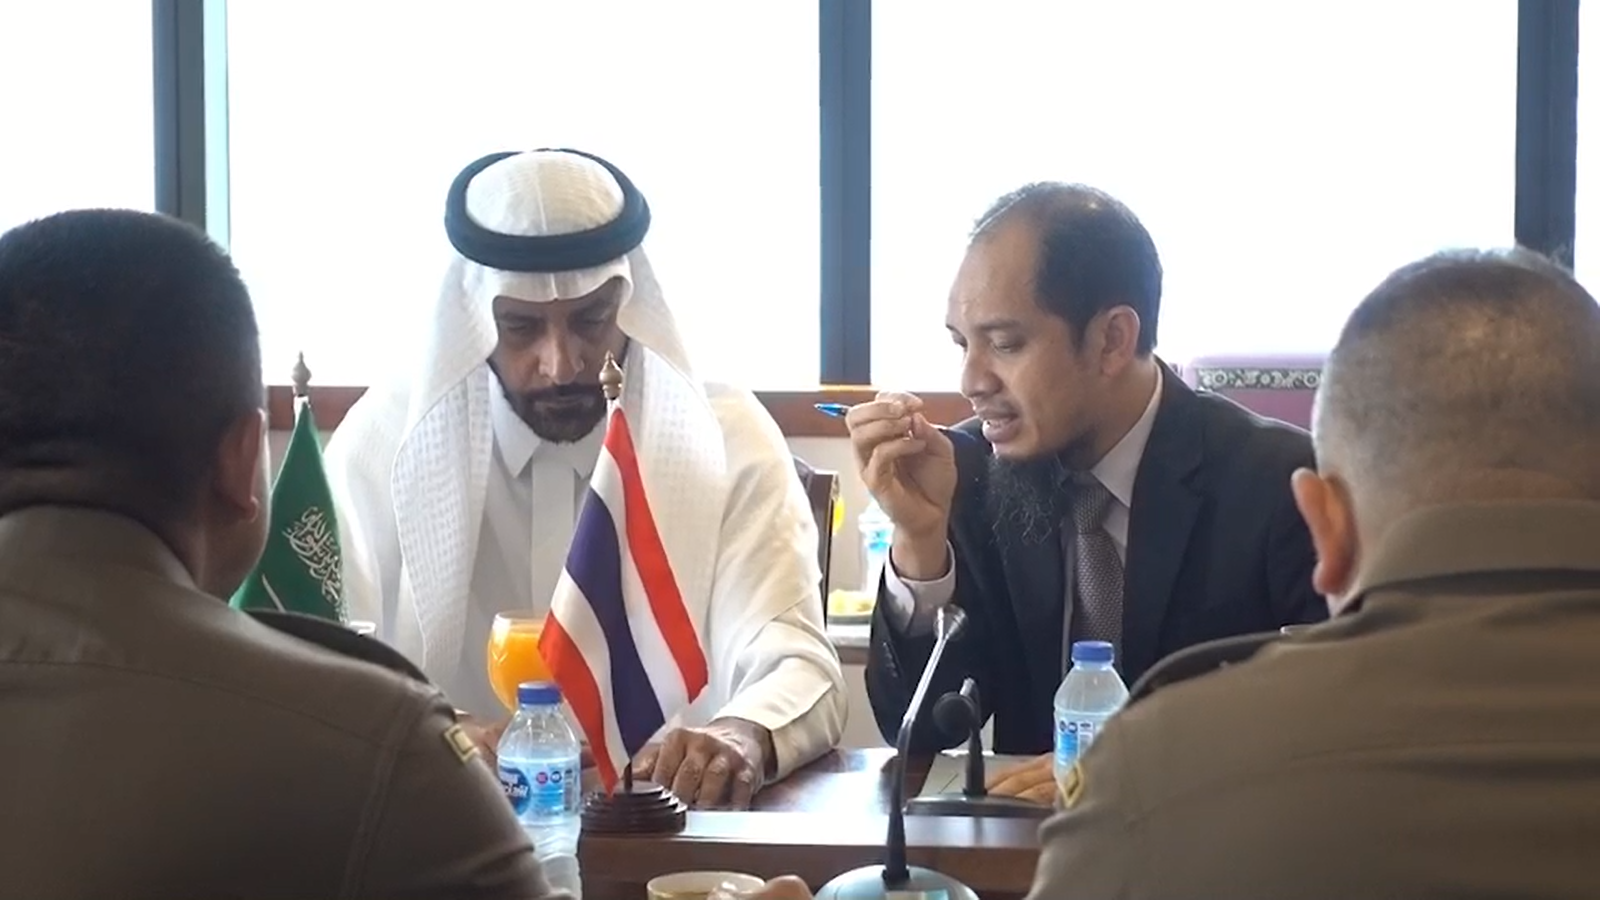 Saudi Arabia's charge d'affaires in Bangkok Abdullah al-Shuaibi, at left, in a meeting Tuesday with Thai officials.